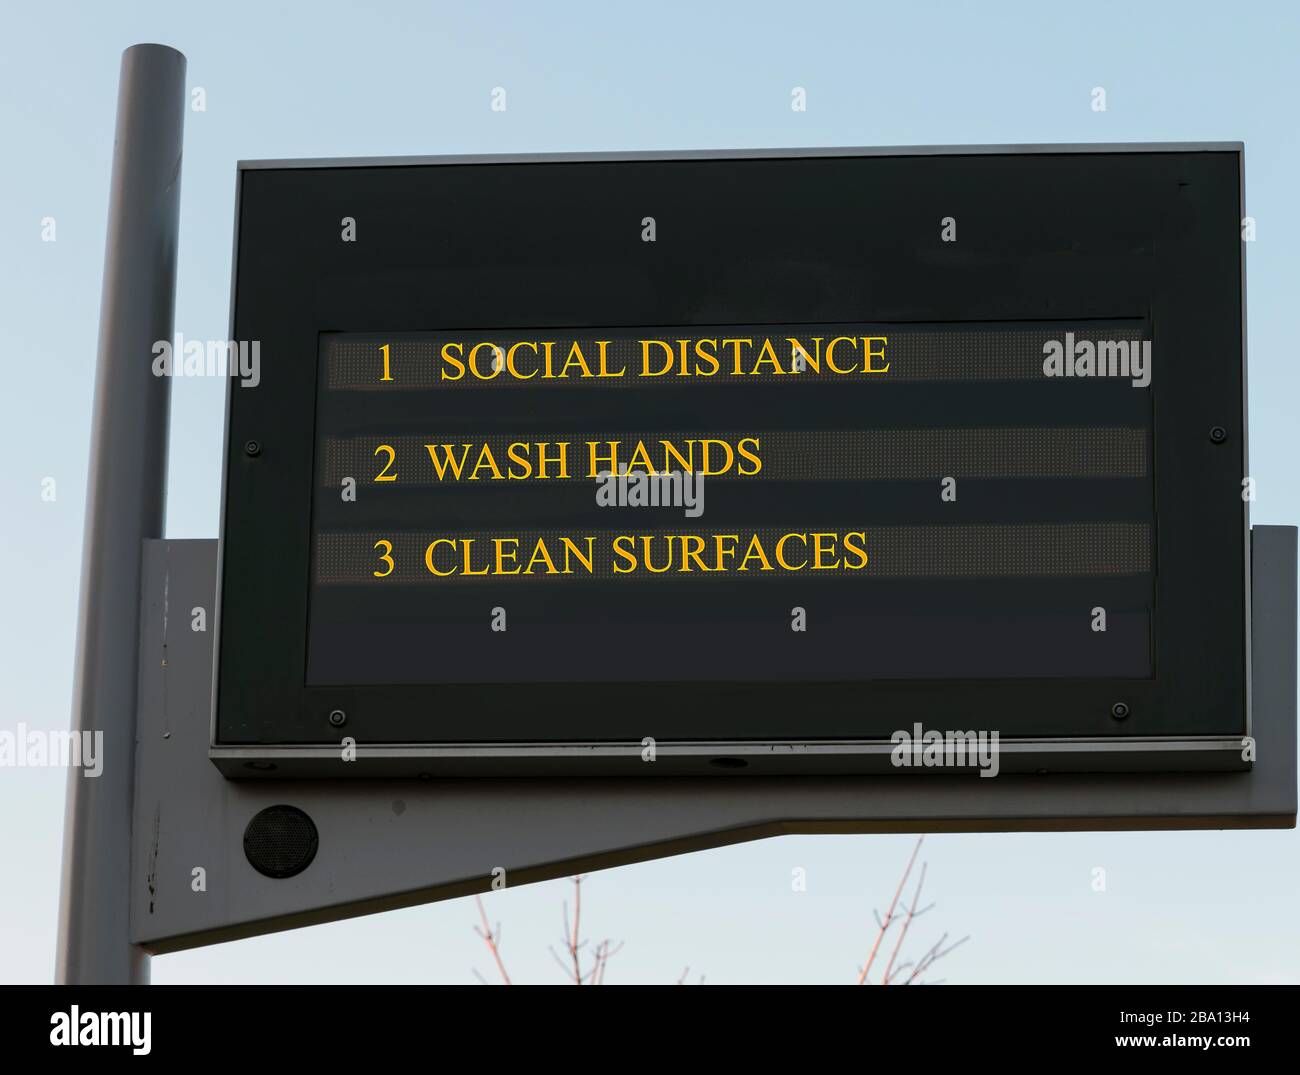 Bus station board billboard with three basic rules to avoid the coronavirus or Covid-19 epidemic of wash hands, maintain social distance and clean surfaces Stock Photo